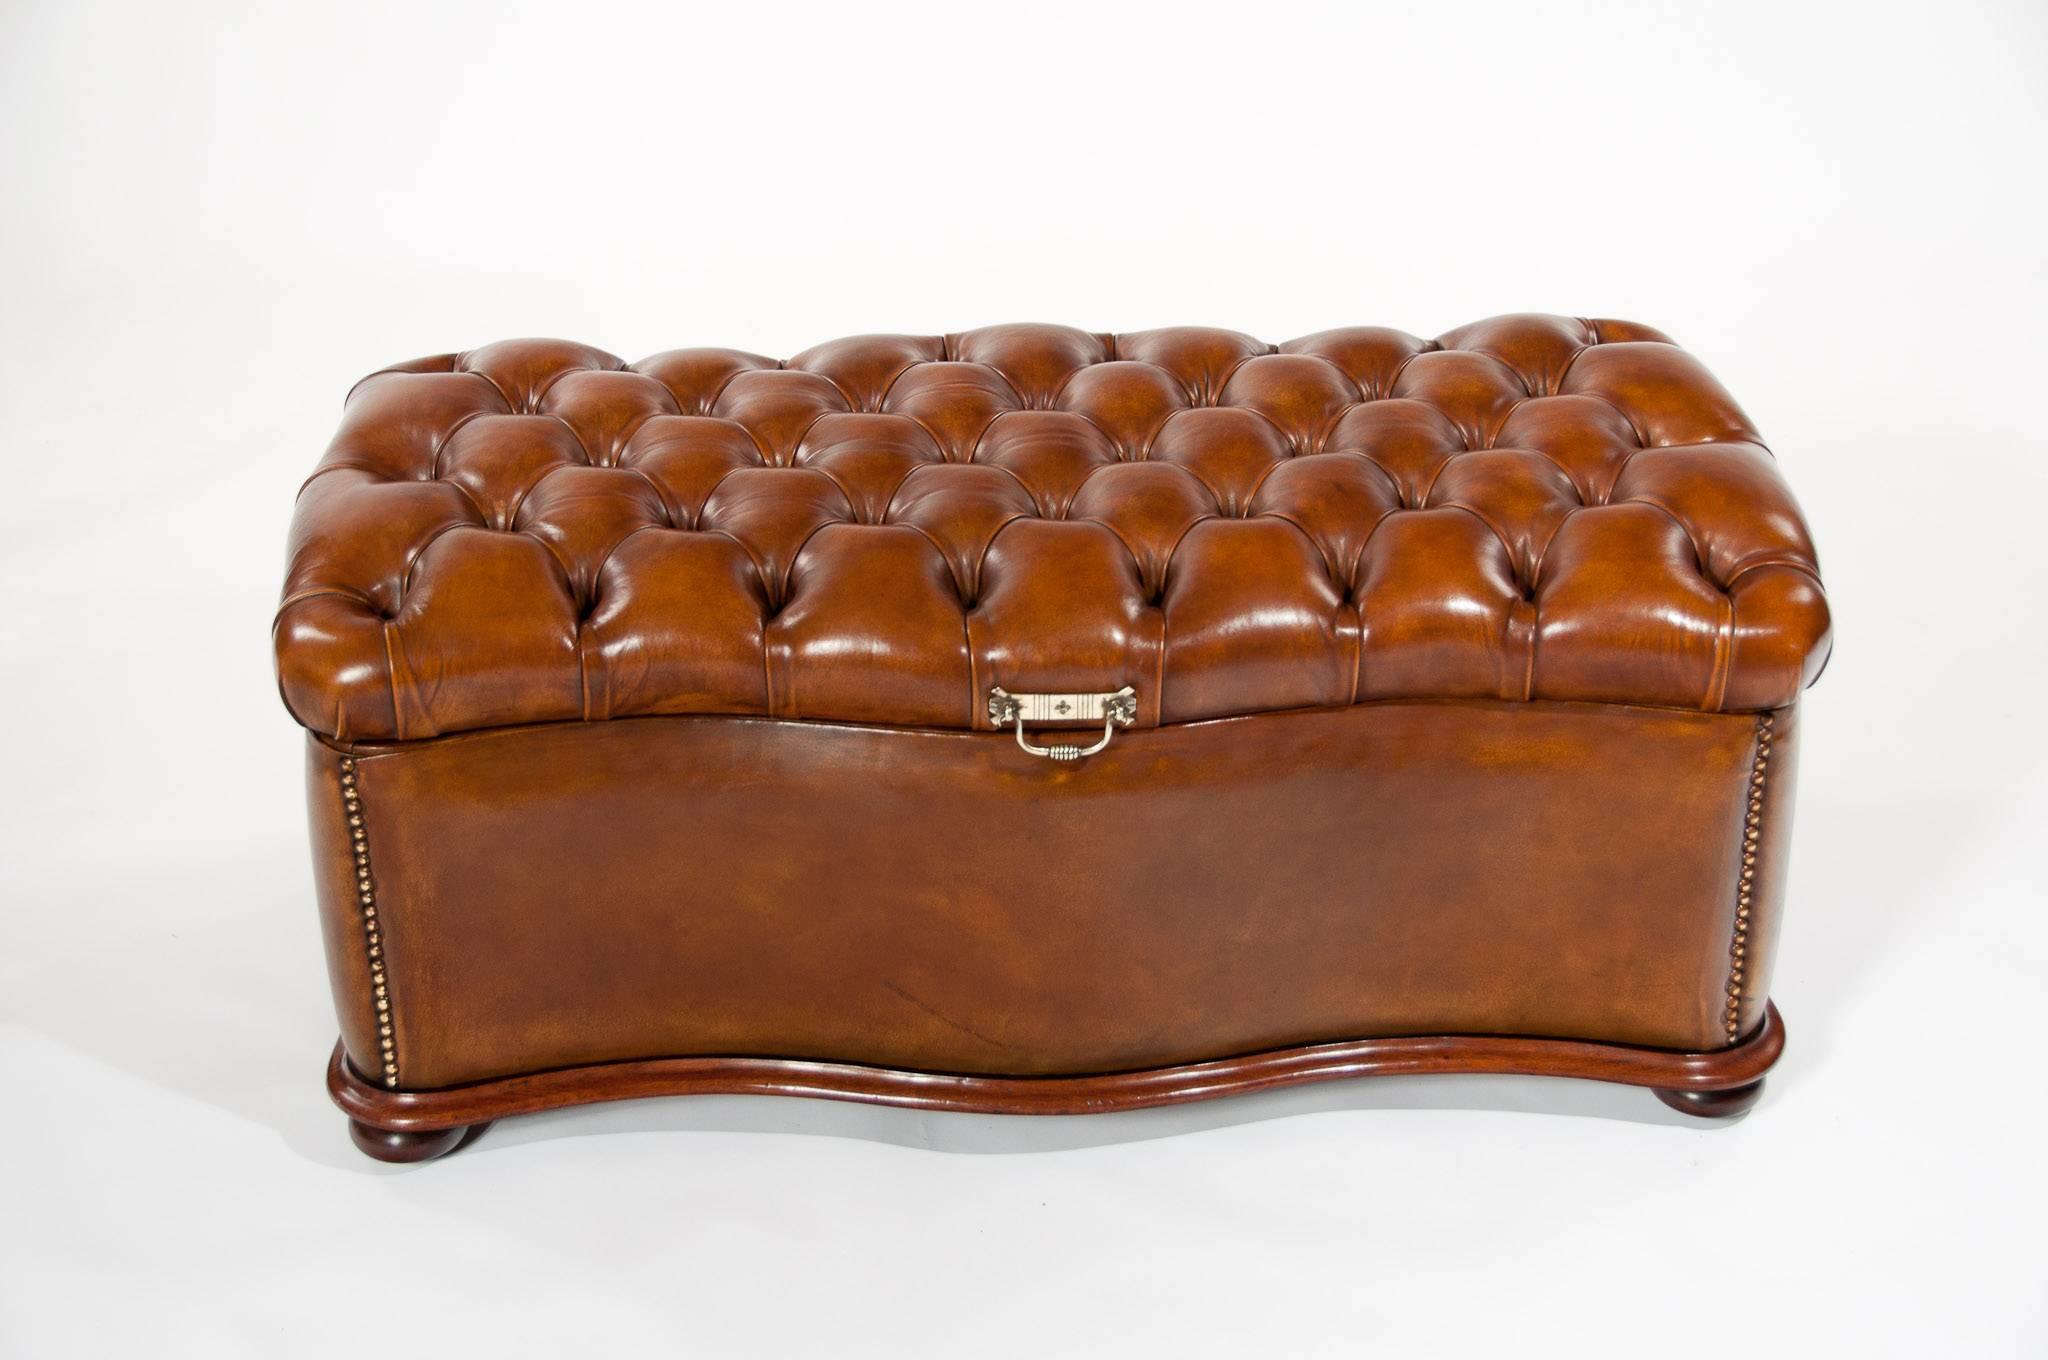 Excellent 19th Century Shaped Leather Ottoman 1